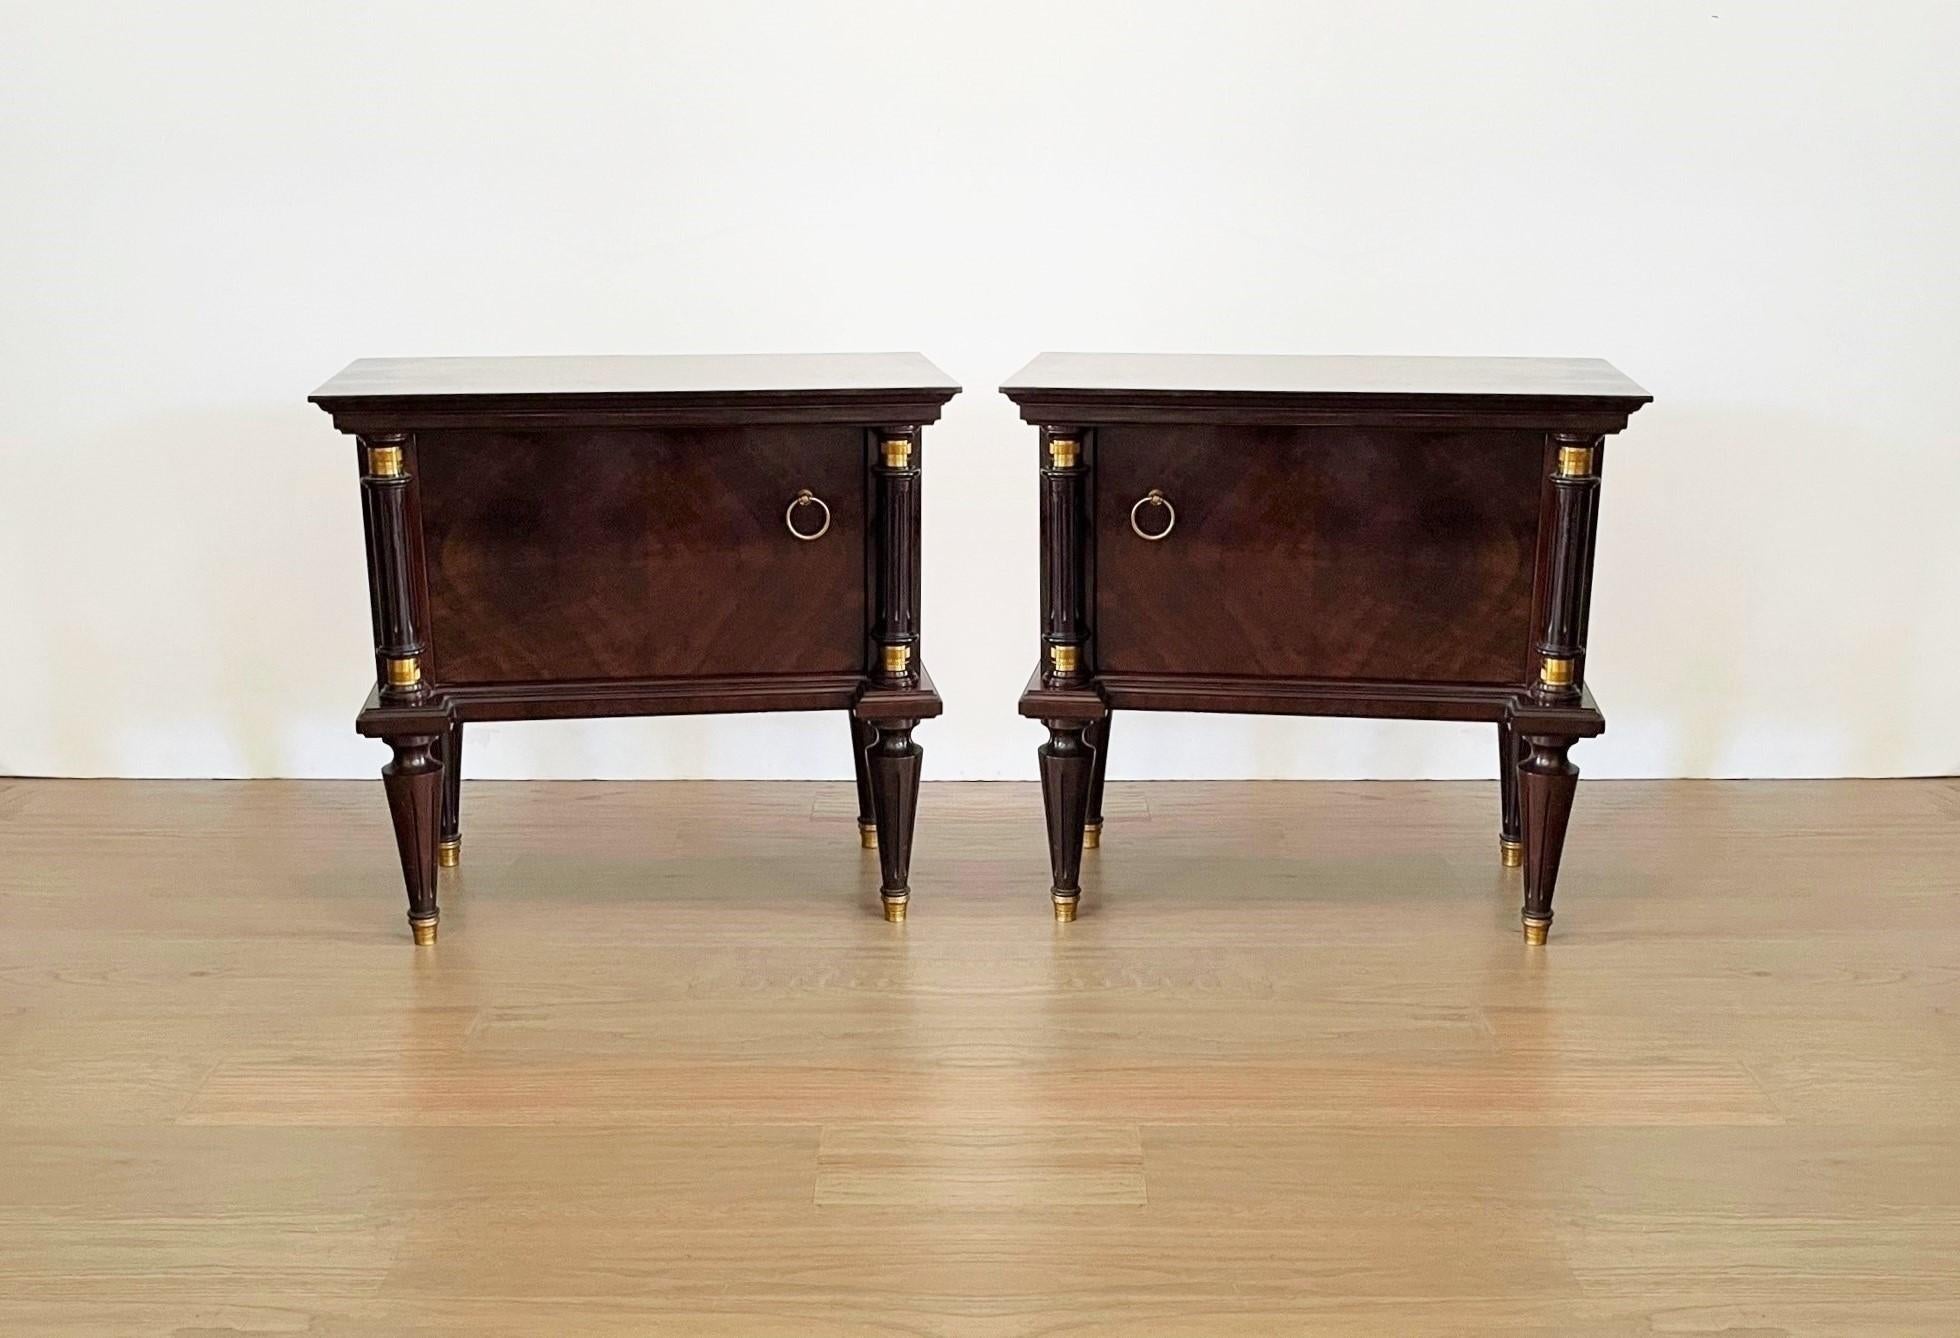 Fine pair of Italian neoclassical night stands or side tables, art deco styling, exude luxurious style from every angle! The polished nightstands with gorgeous book-matched flame mahogany door fronts creating exquisite patterns that opens to a